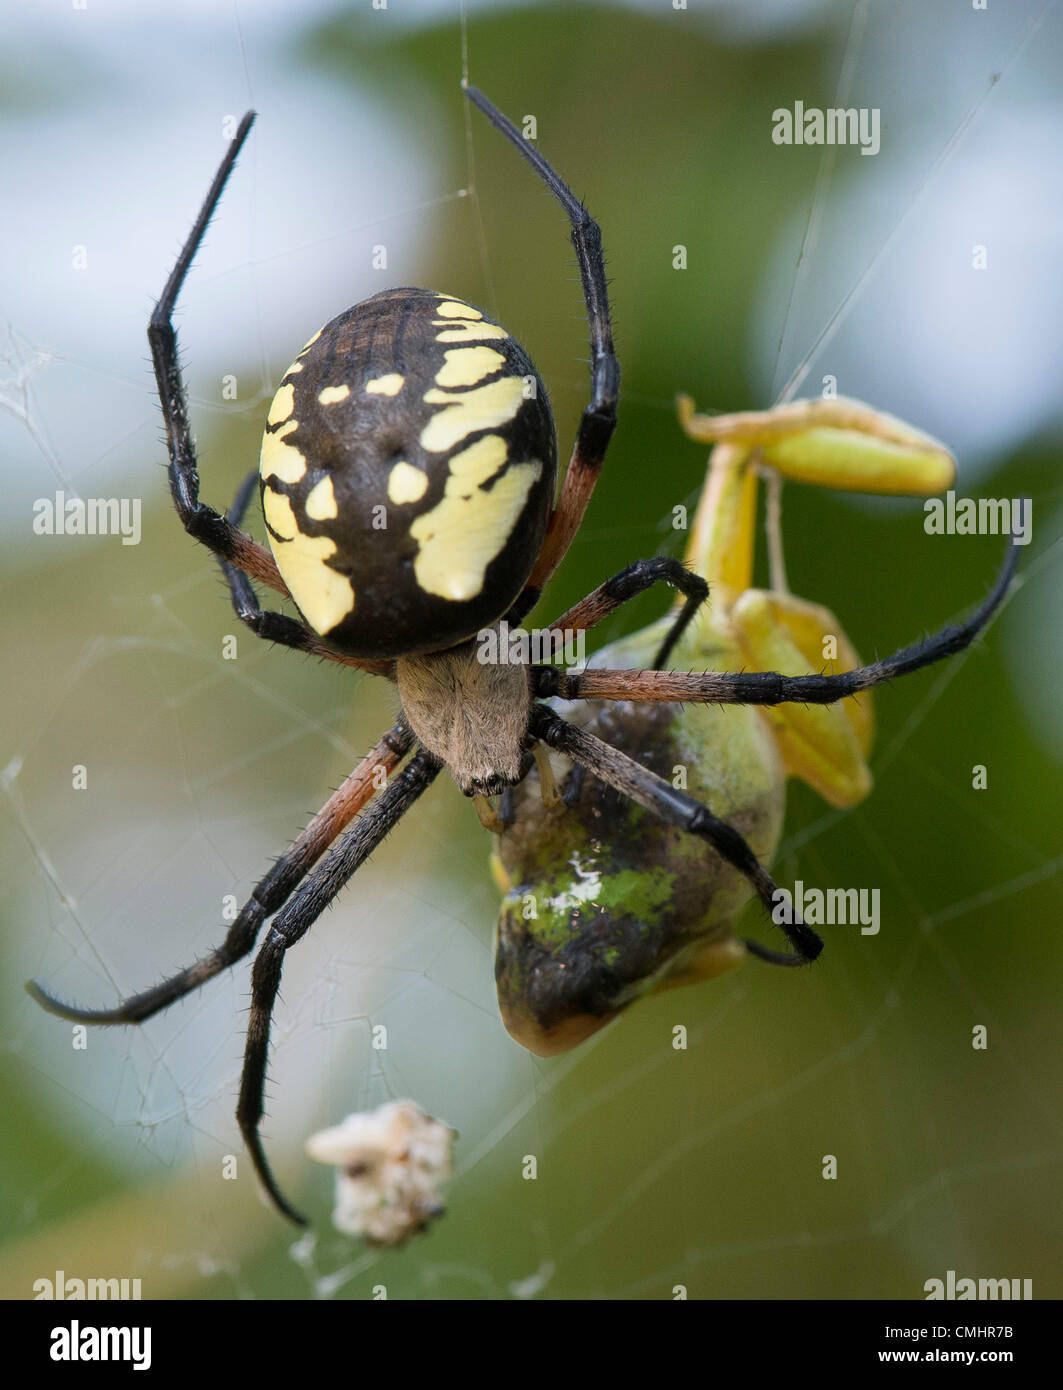 Aug. 12, 2012 - Roseburg, Oregon, U.S - A large black and yellow garden spider uses her acidic saliva and stomach acids to liquify a Pacific tree frog as she consumes it in her web strung in a blackberry thicket along a seasonal creek near Roseburg. (Credit Image: © Robin Loznak/ZUMAPRESS.com) Stock Photo